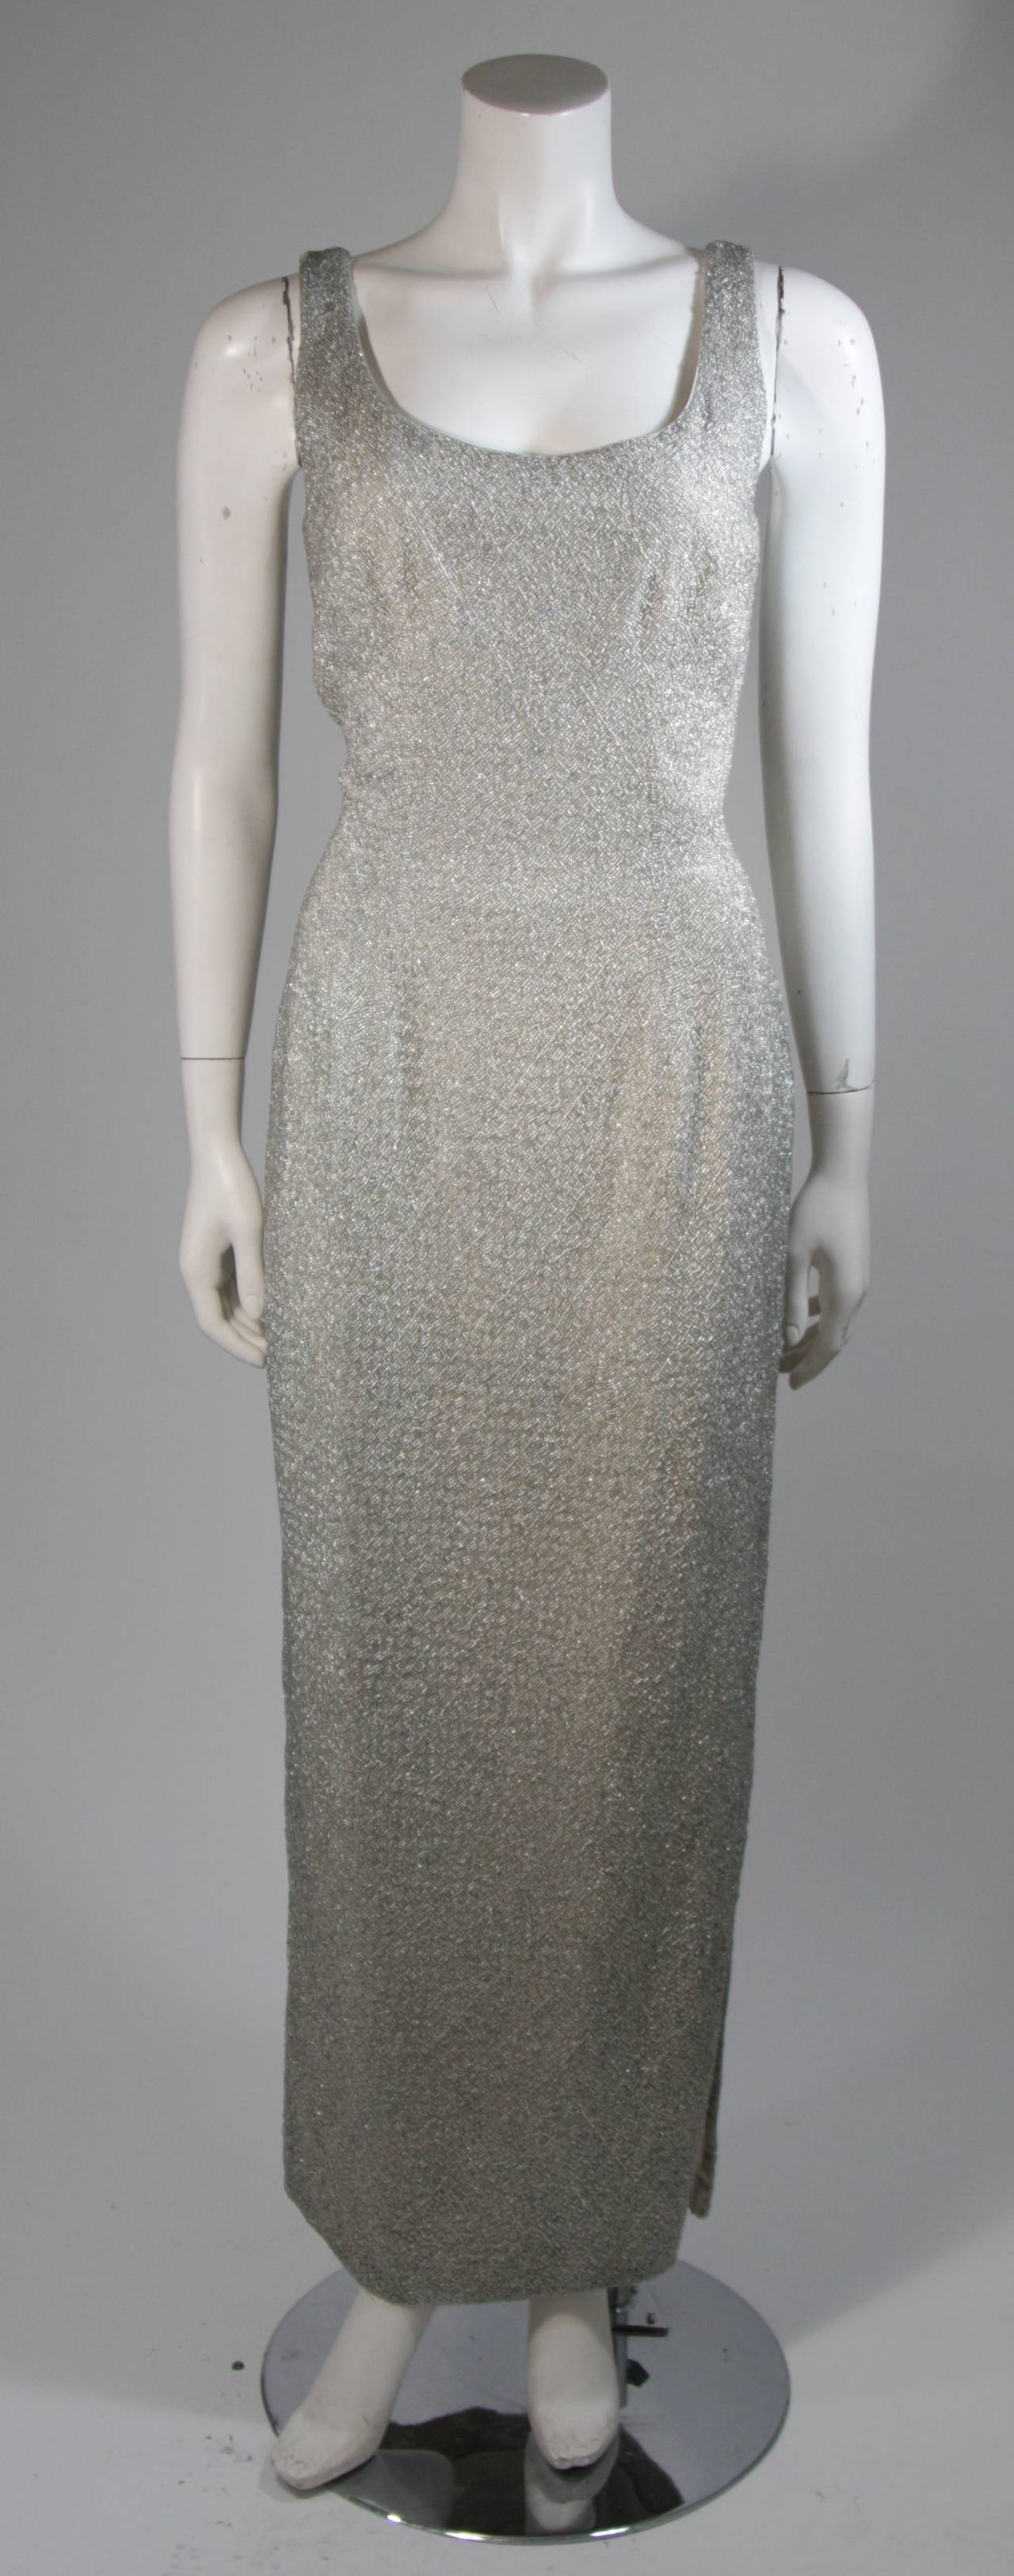 This Haute Couture International 1960s gown is an absolute stunner featuring immaculate beading throughout in a silver hue. There is a center back zipper closure. It is composed of 100% silk. In excellent condition. Made in Hong Kong. 

**Please